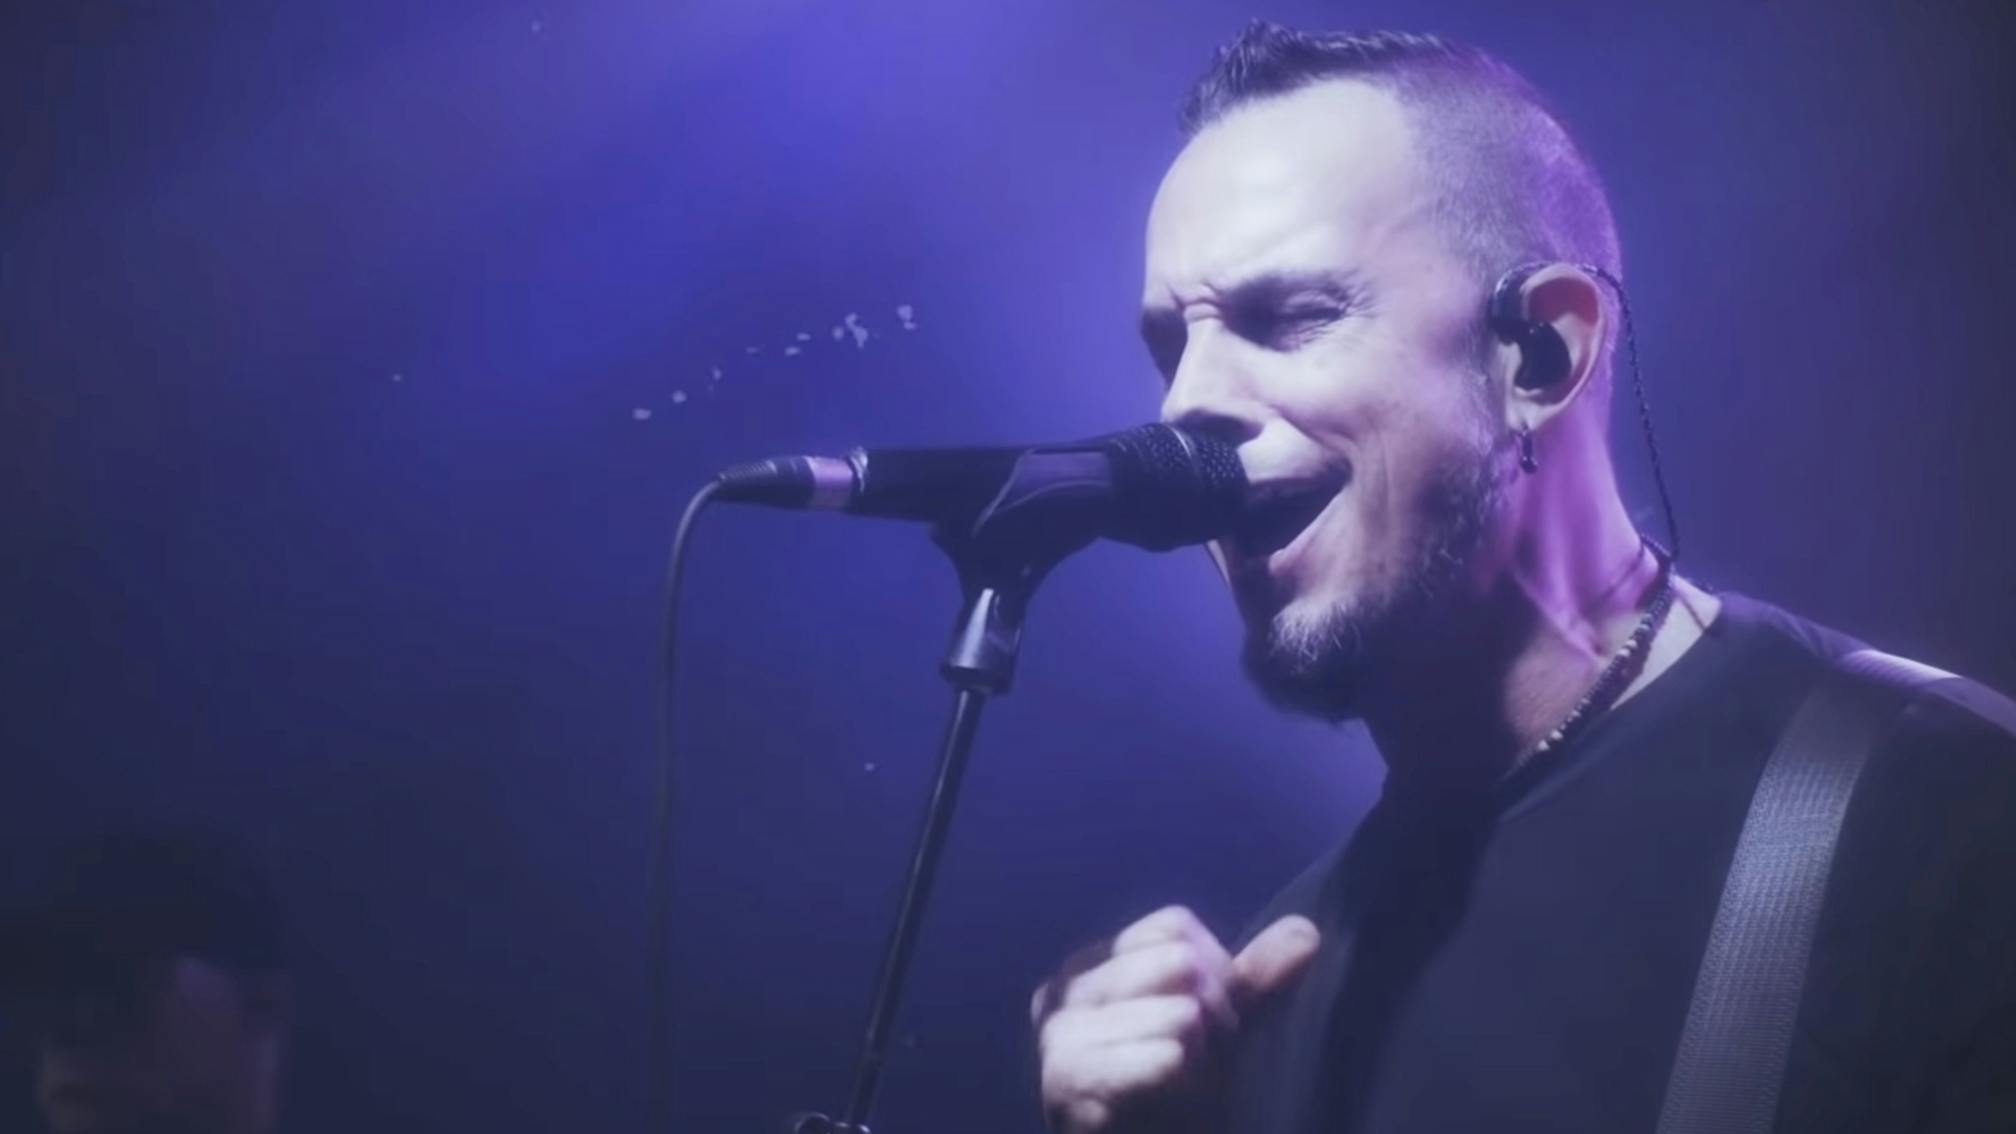 Watch the performance video for Tremonti's epic new single Marching In Time